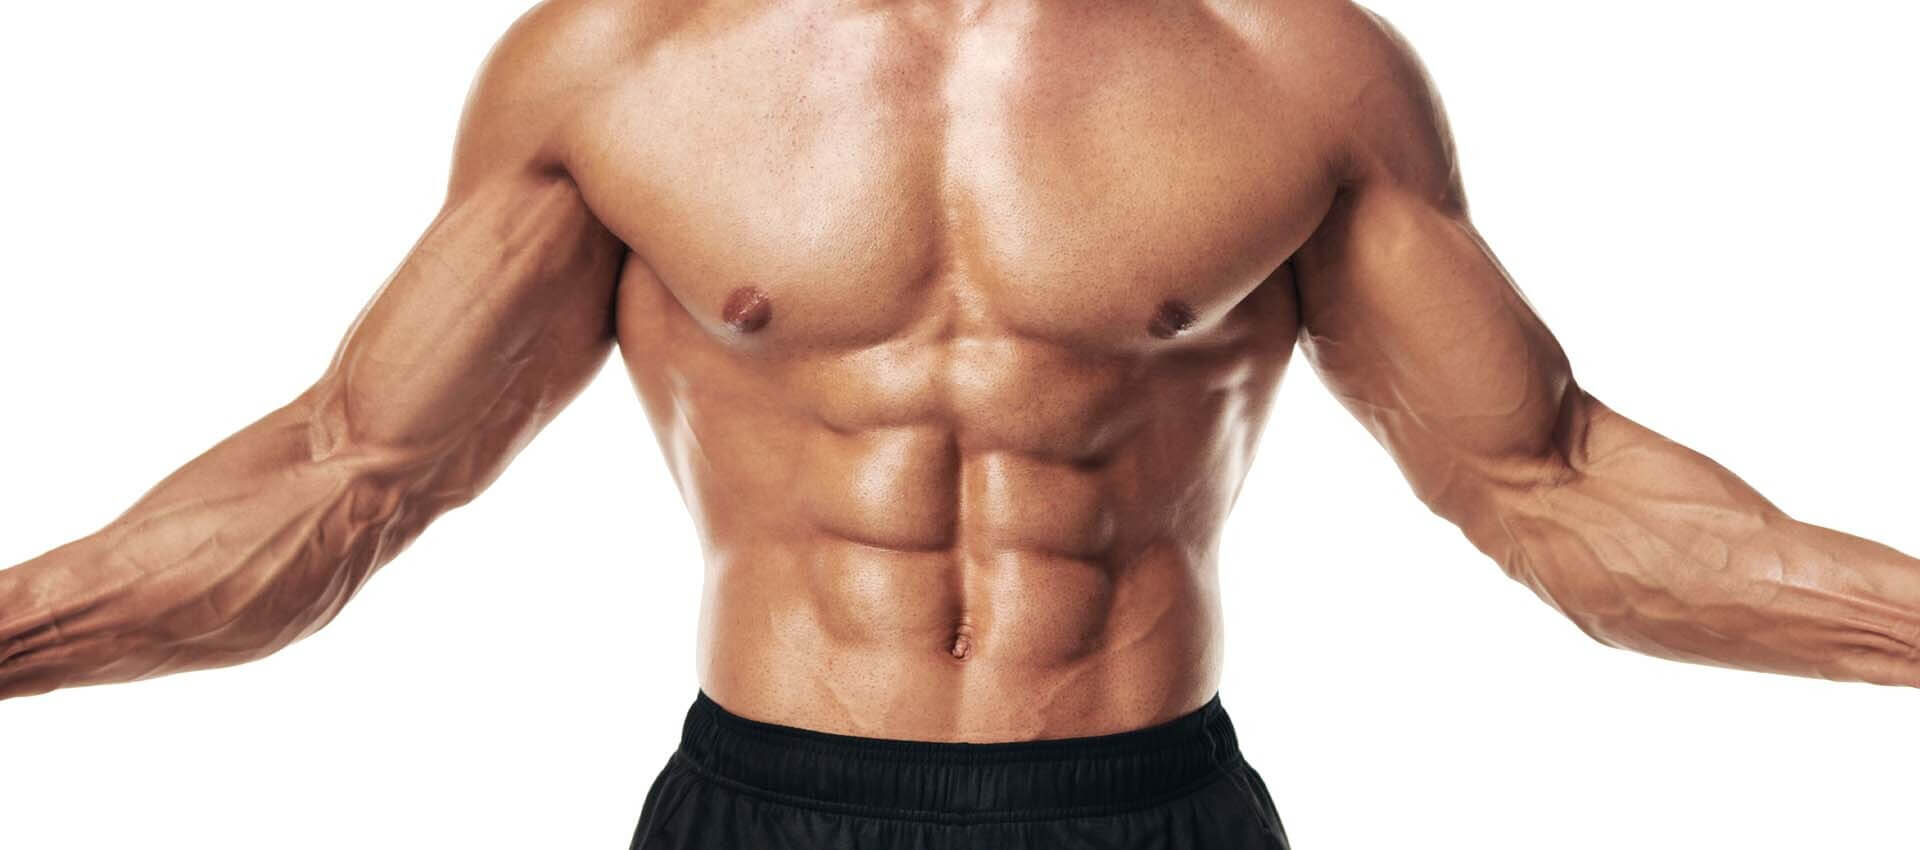 Six Pack Abs png images